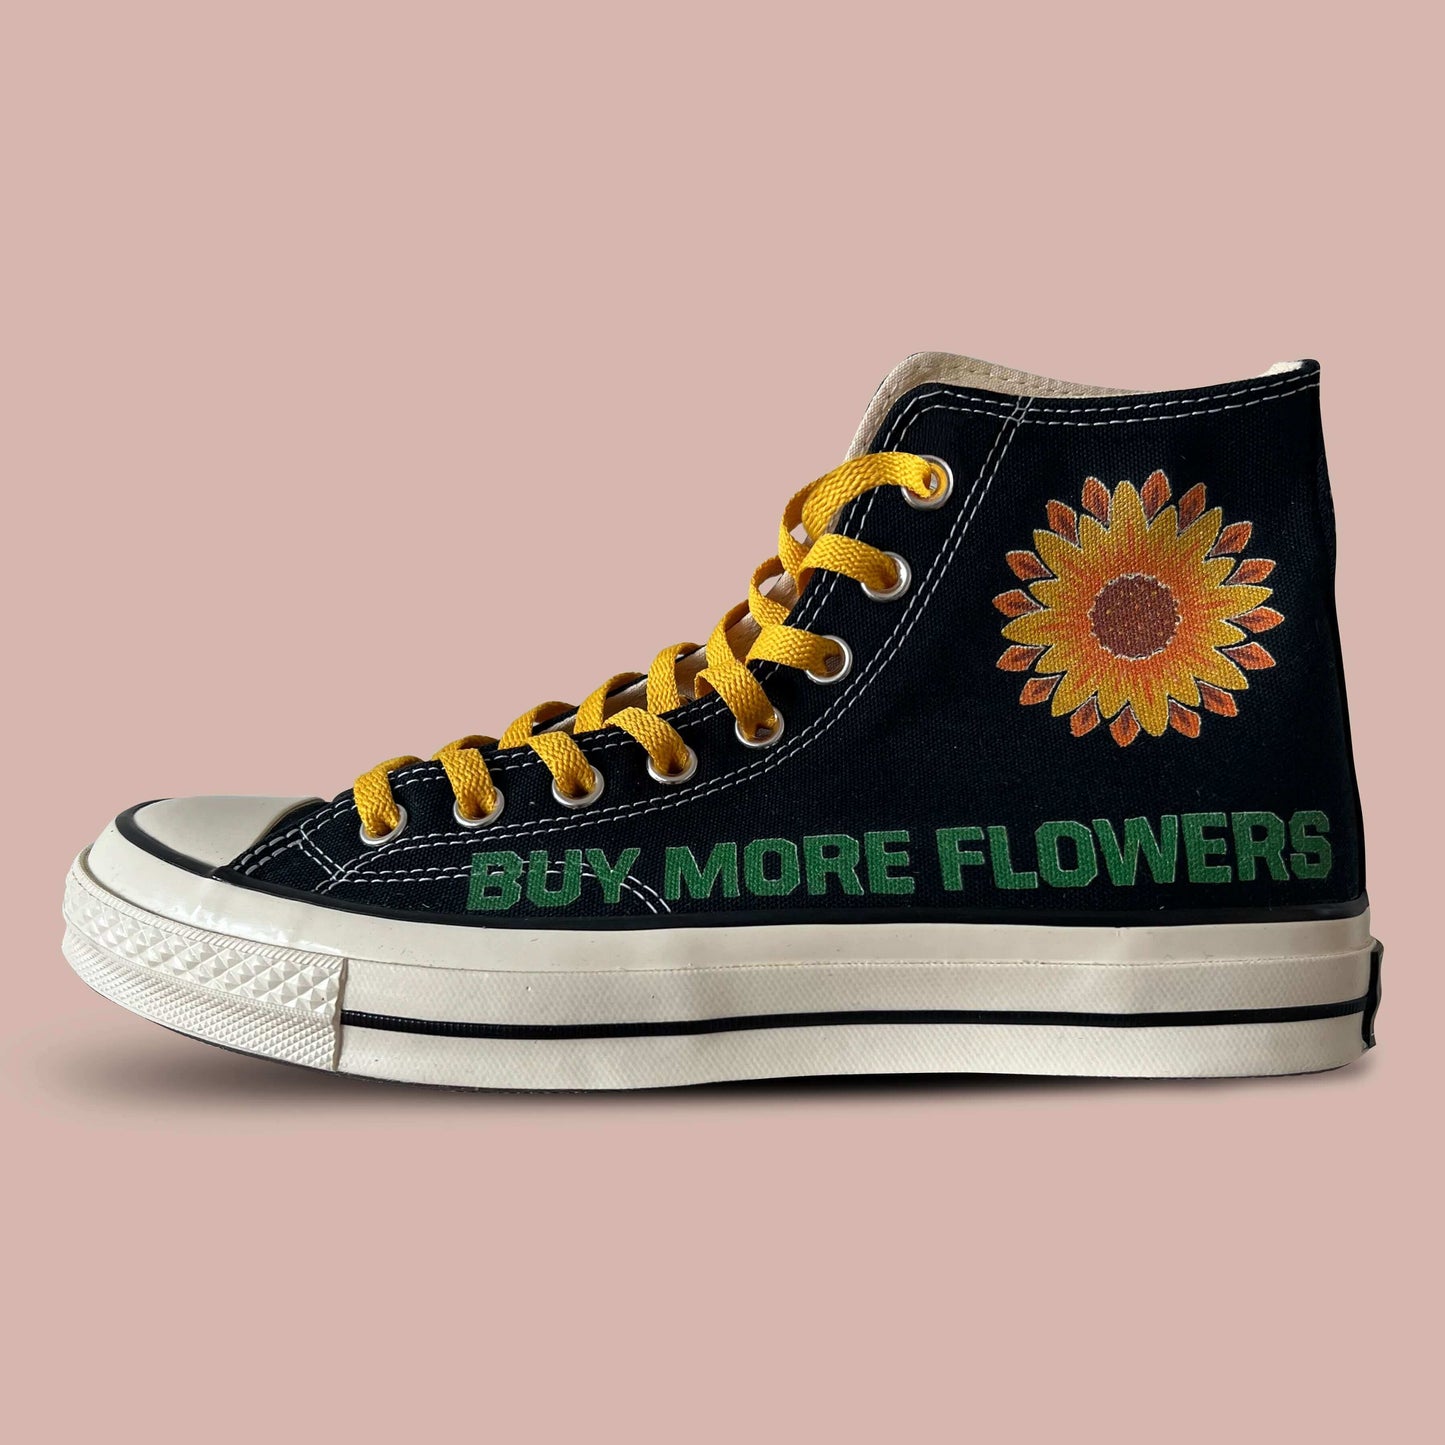 "Buy More Flowers!" Objects by SO x Converse Chuck 70s Hi (Black)